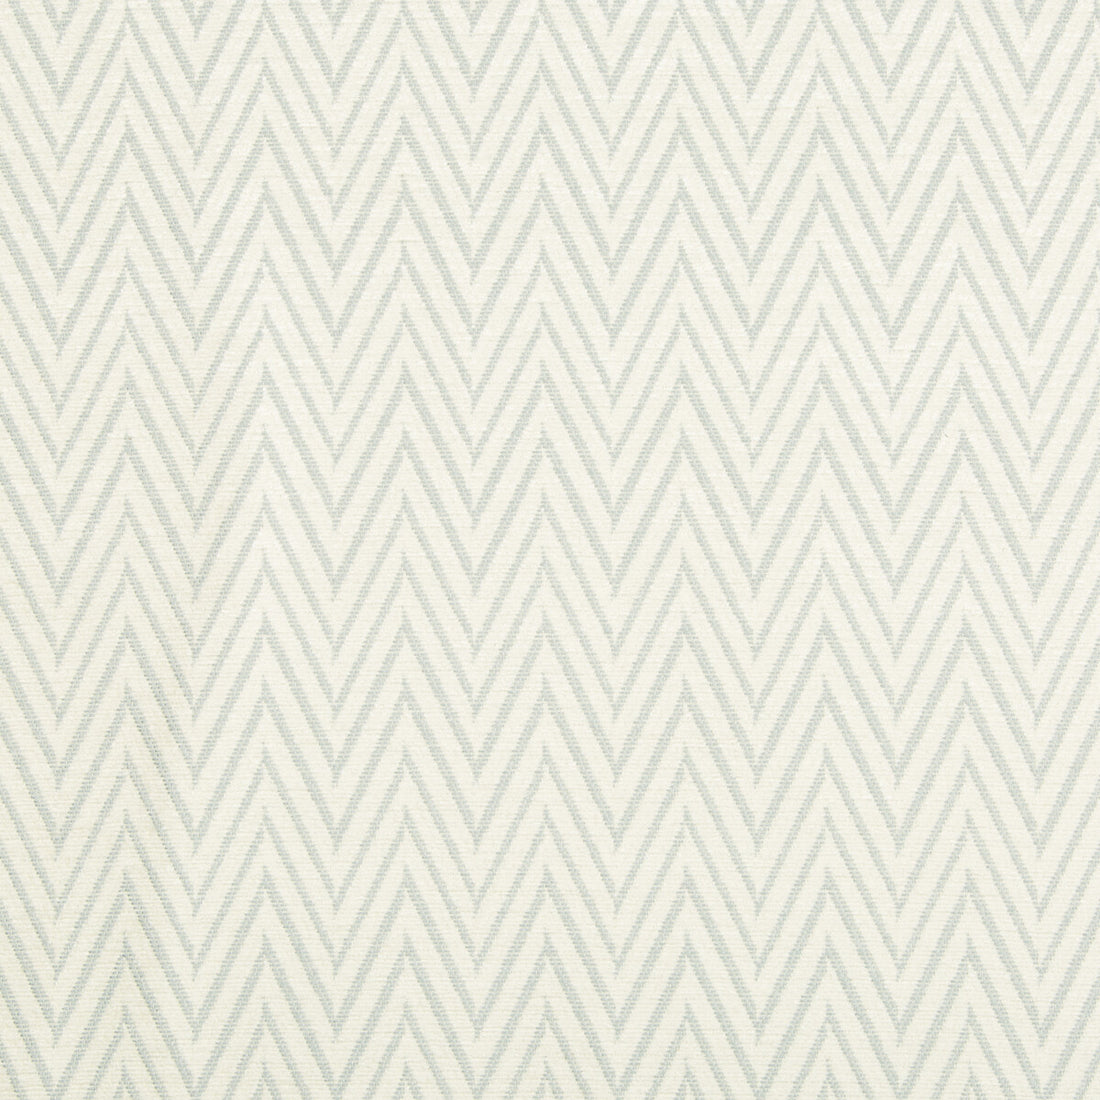 Kravet Contract fabric in 34743-15 color - pattern 34743.15.0 - by Kravet Contract in the Incase Crypton Gis collection